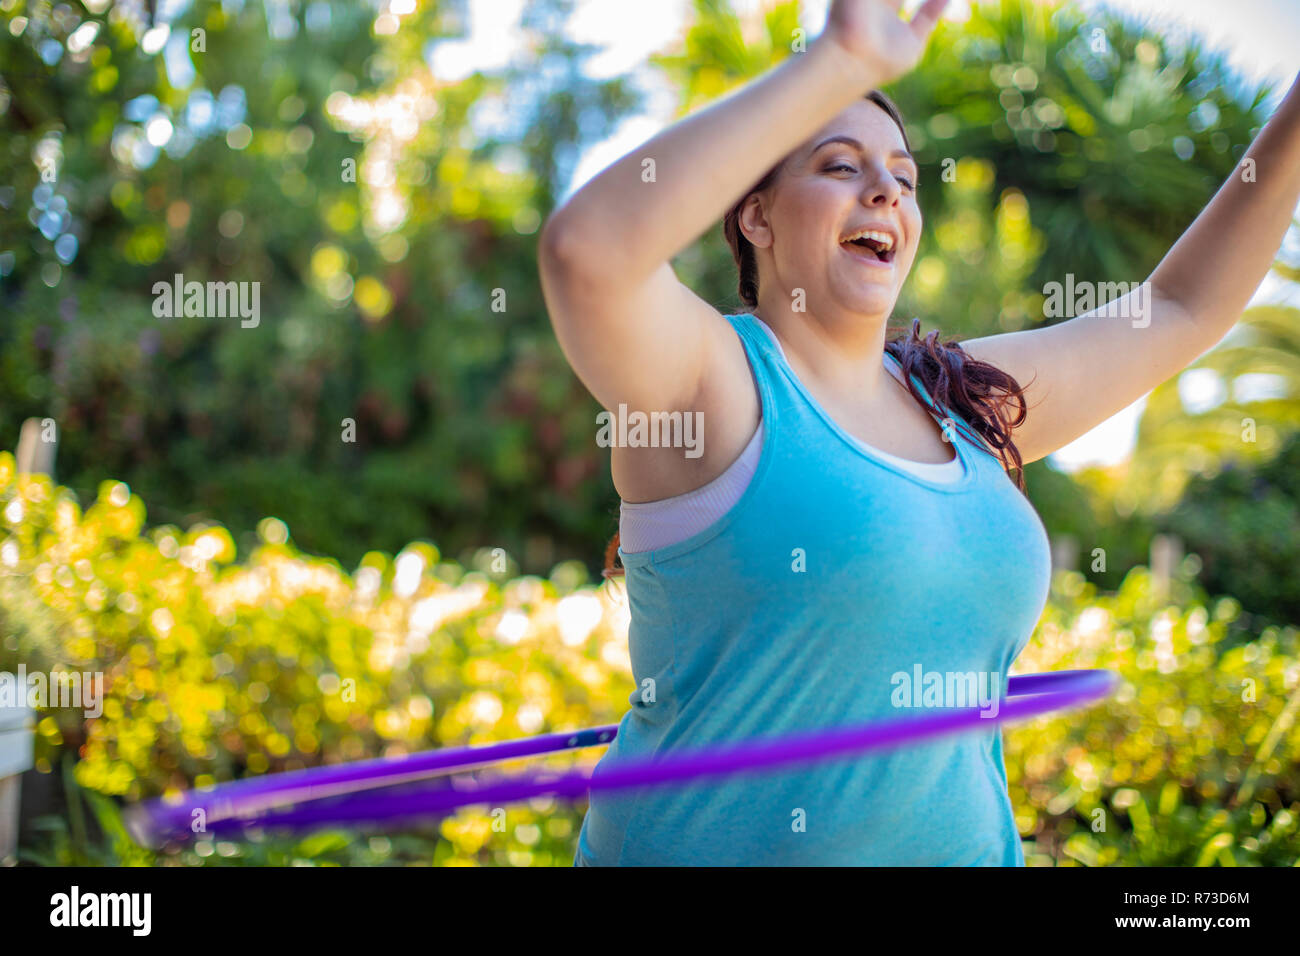 Woman exercising with hula hoop in garden Stock Photo